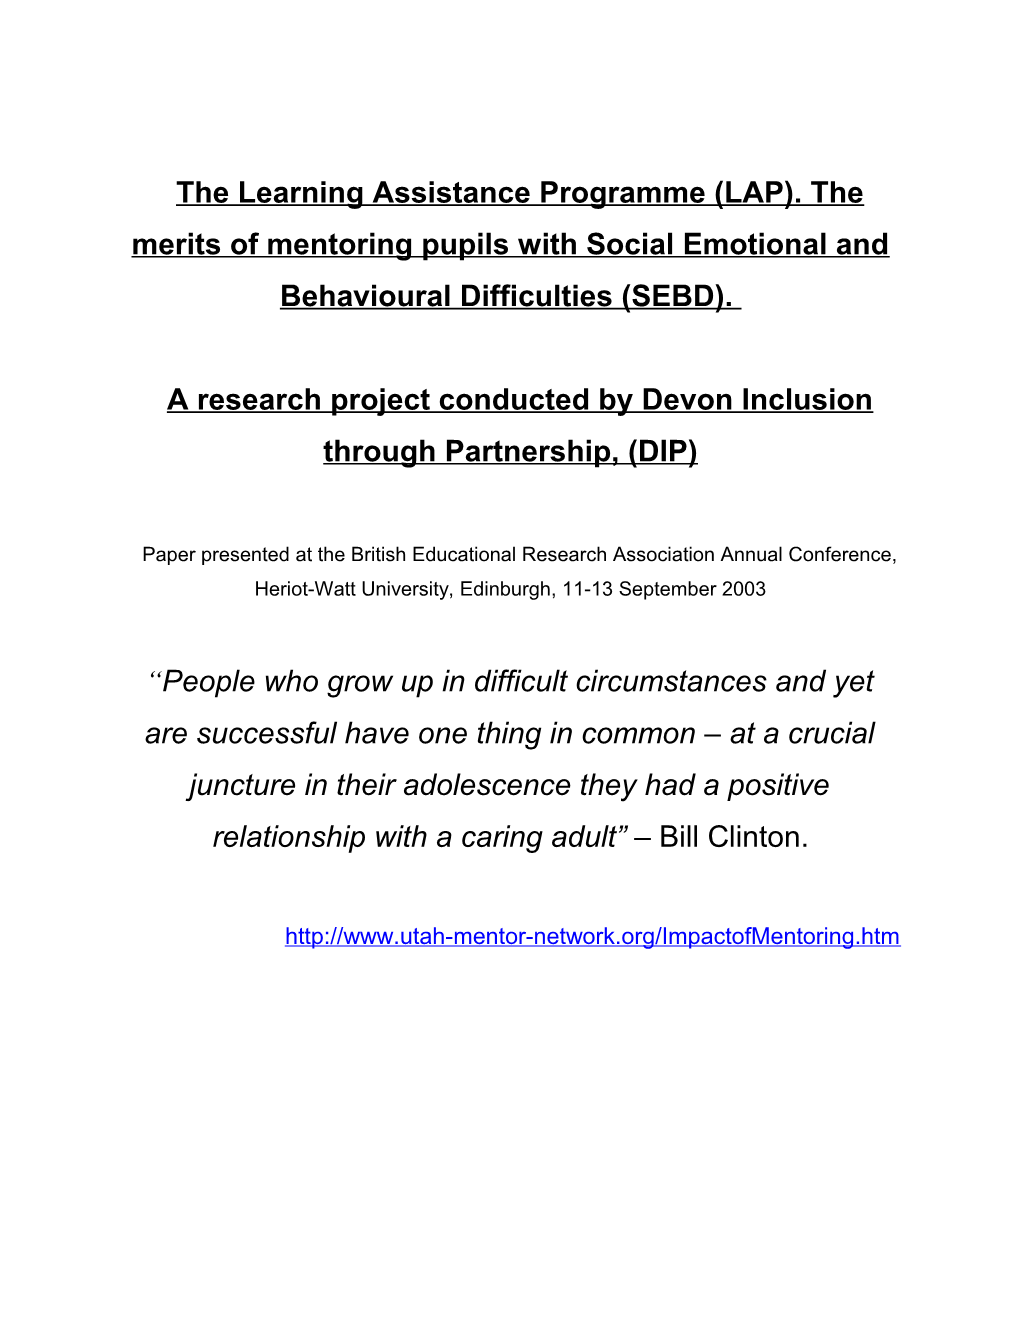 The Learning Assistant Program (LAP)